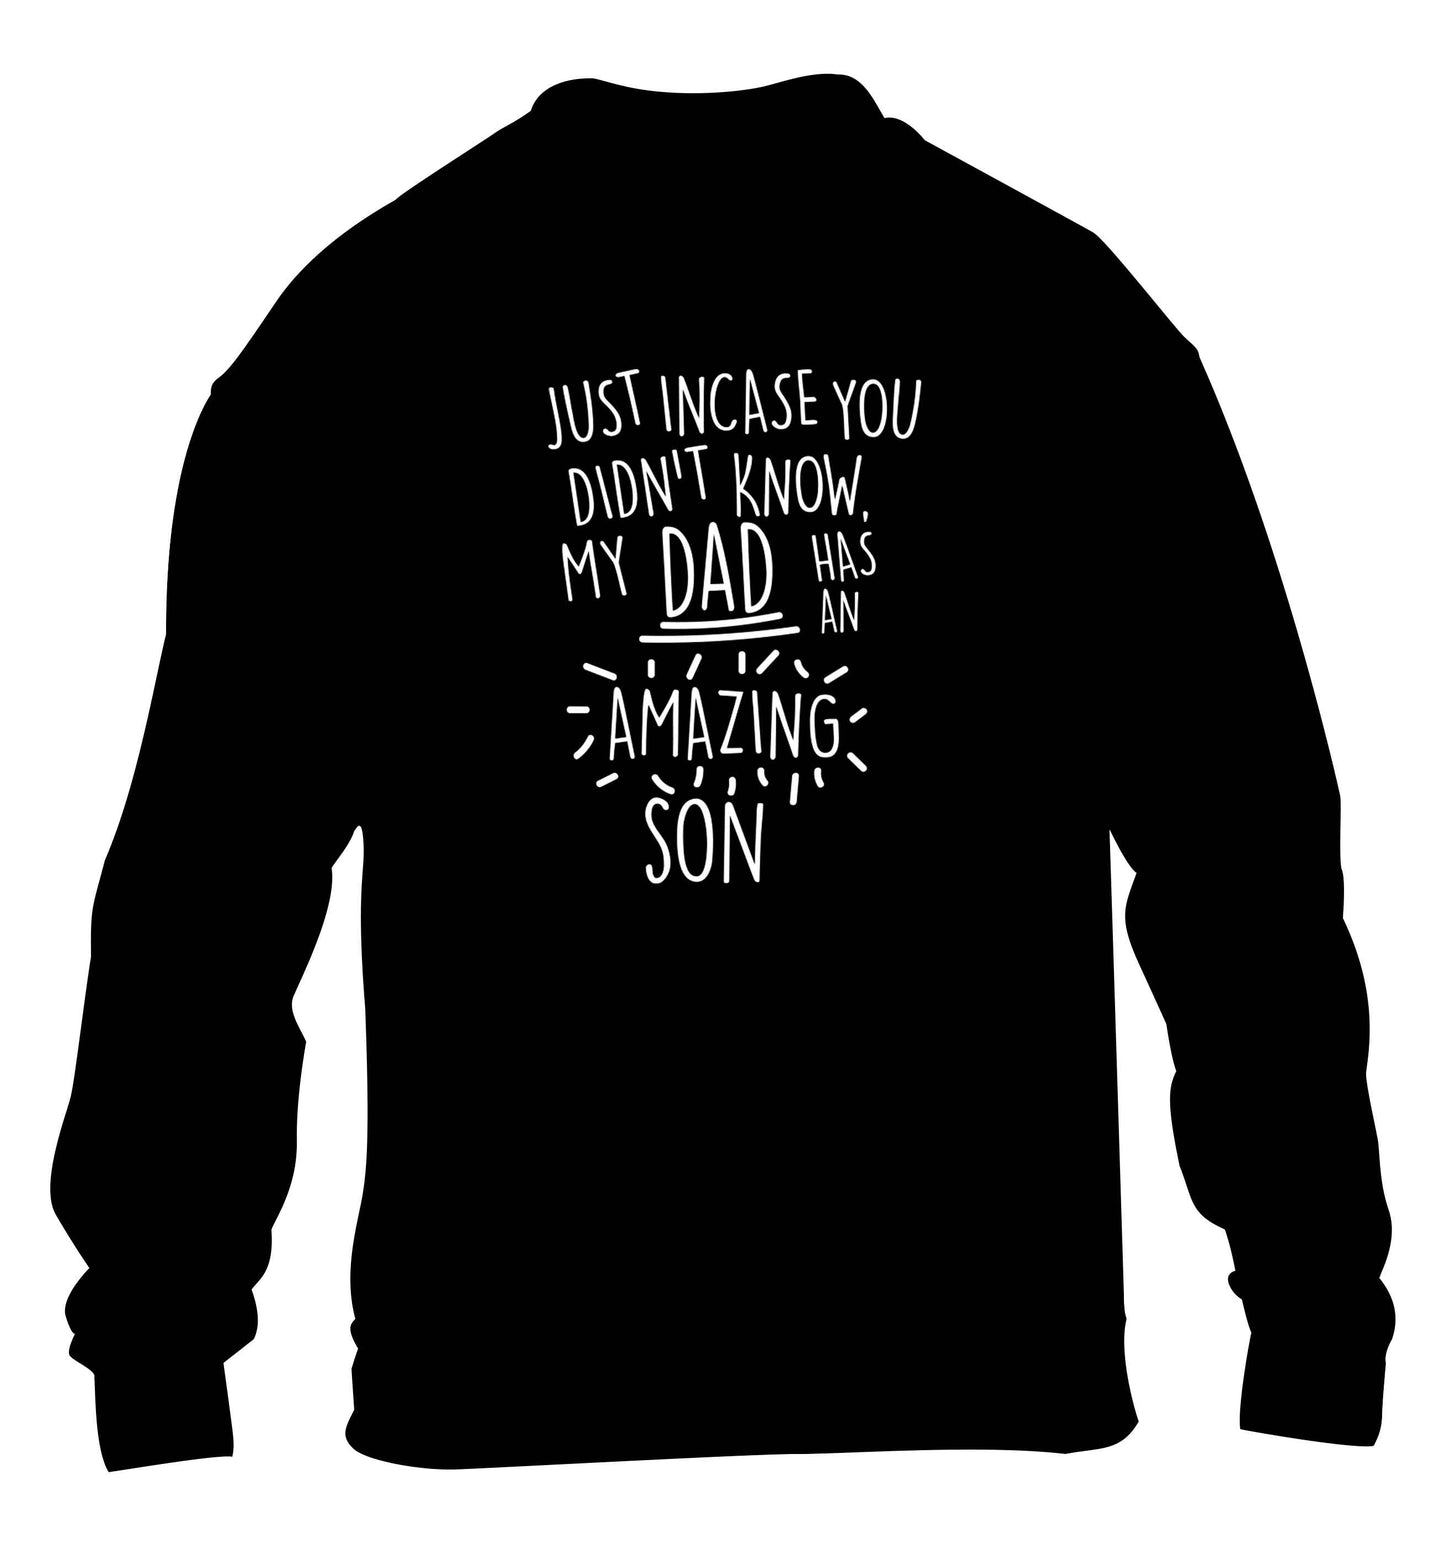 Just incase you didn't know my dad has an amazing son children's black sweater 12-13 Years